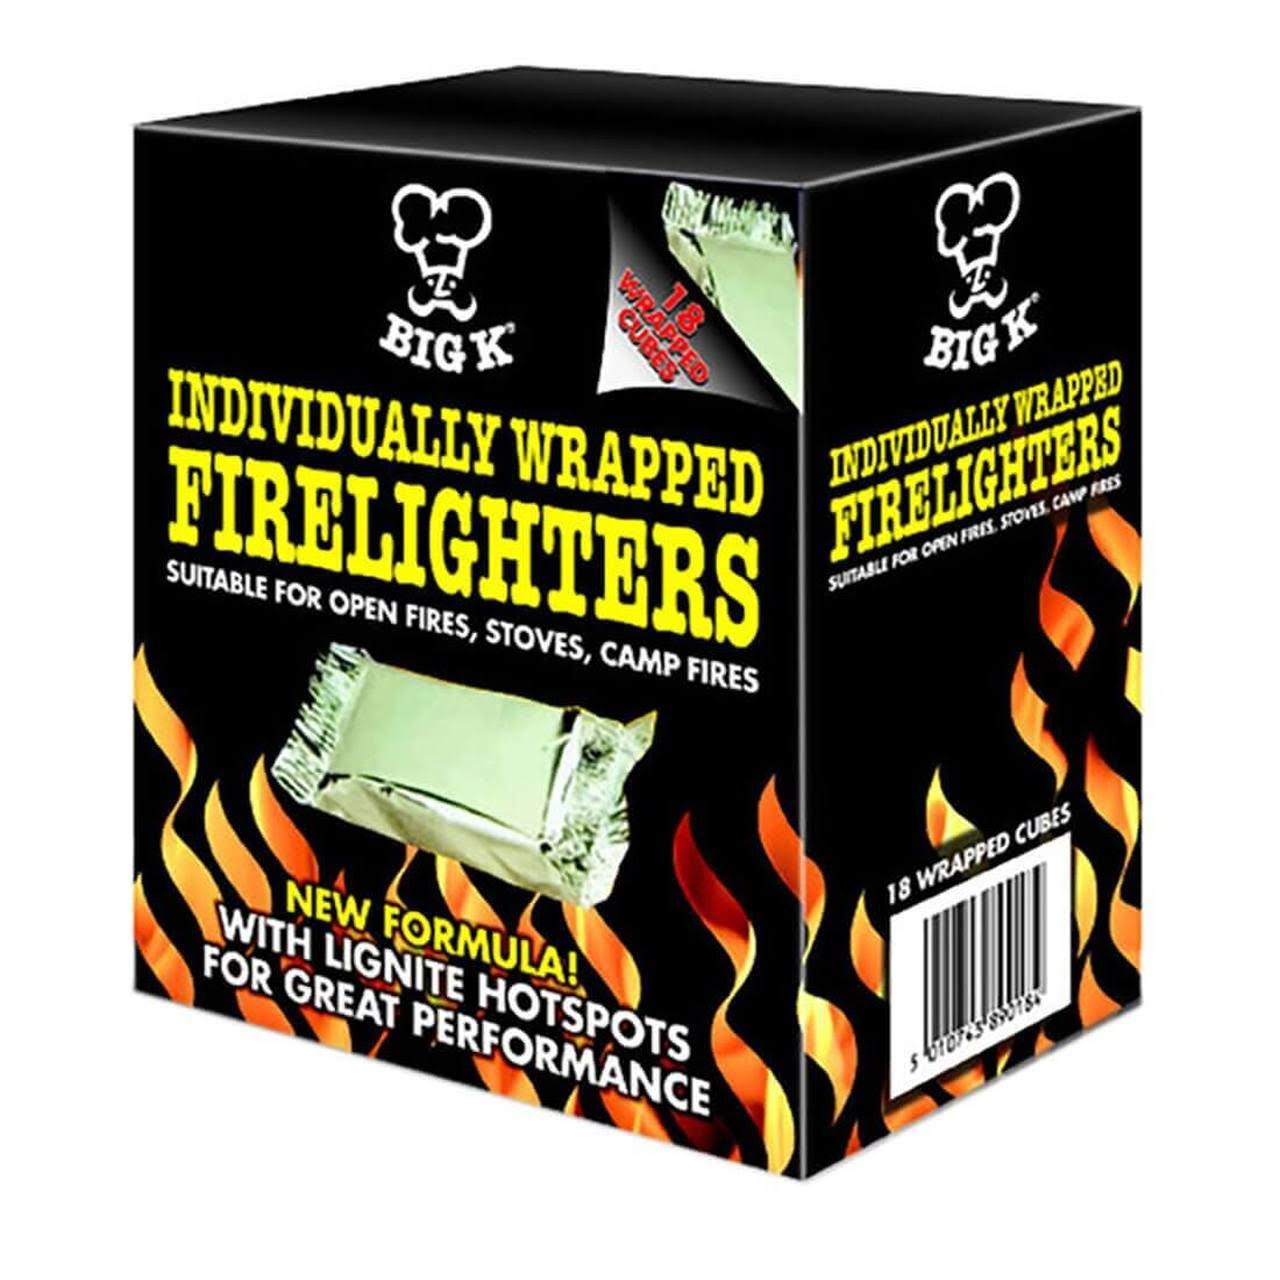 Big K Firelighters 18 Individually Wrapped Cubes BBQ